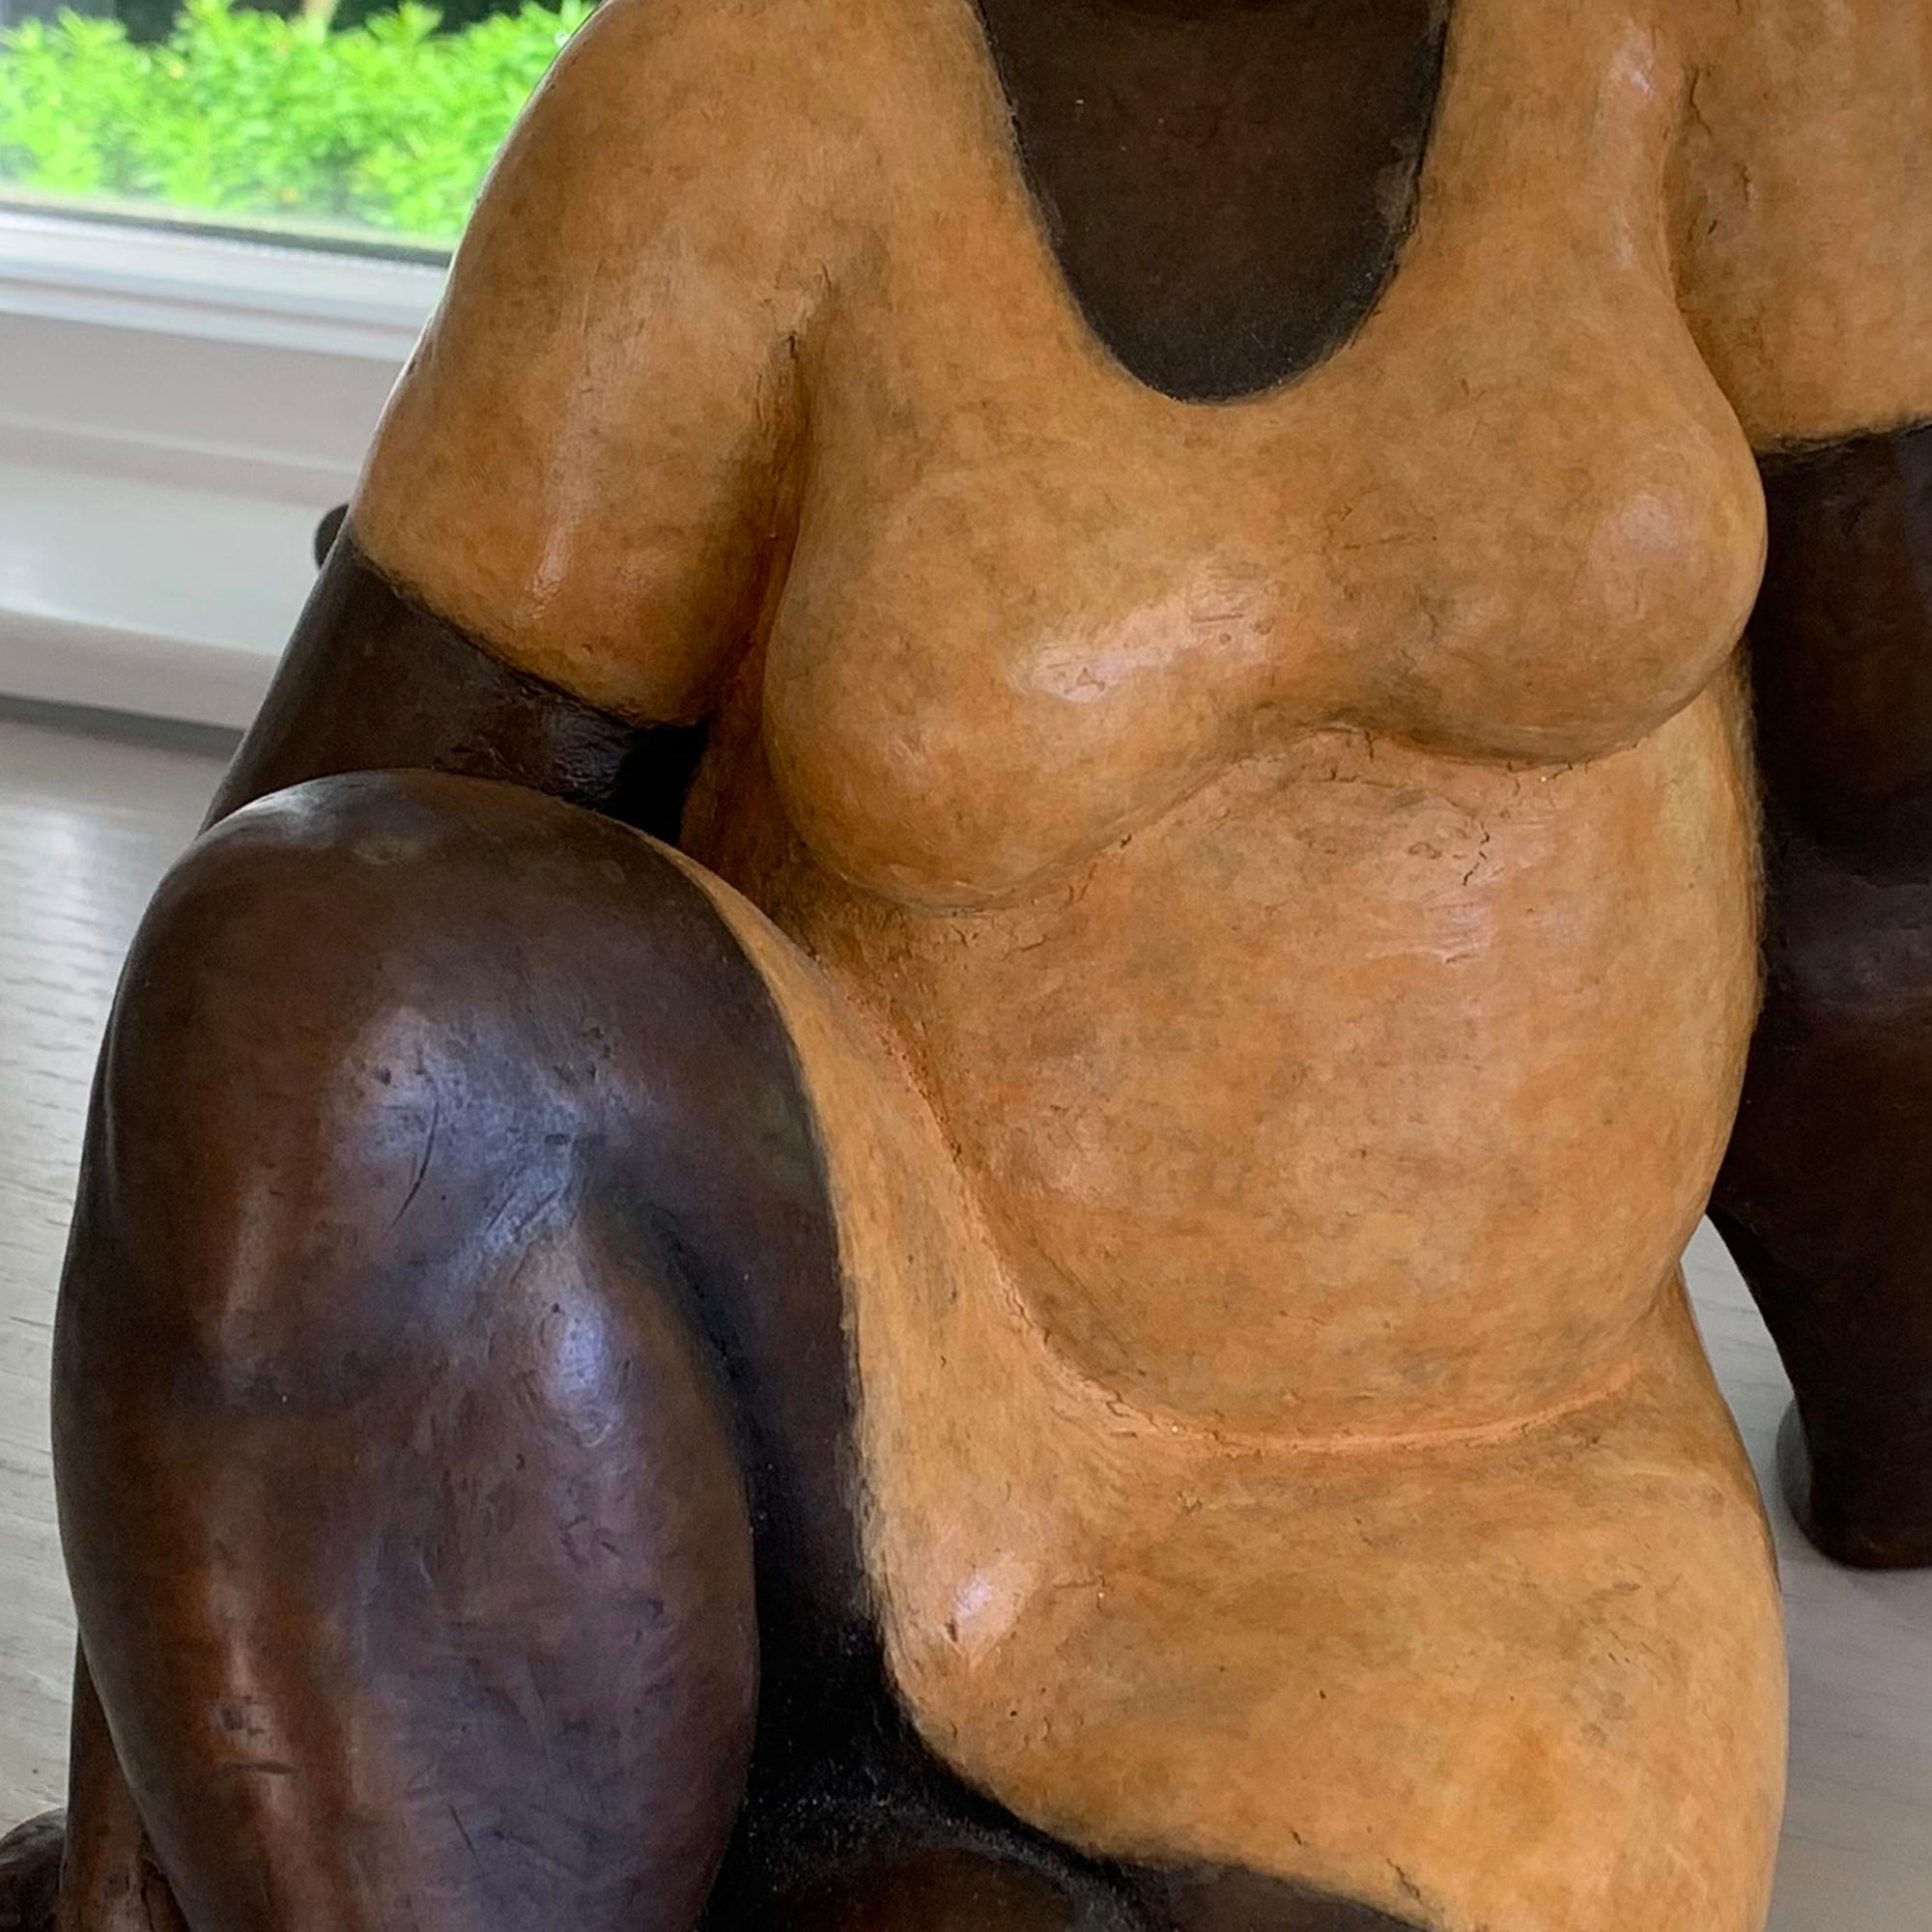 Nnamdi Okowkwo's stylized seated woman in an attitude of tranquility. To create it, he first sculpts the figure in clay, then casts it in bronze using the lost wax technique. A hot patina is applied using compounds that are specifically formulated